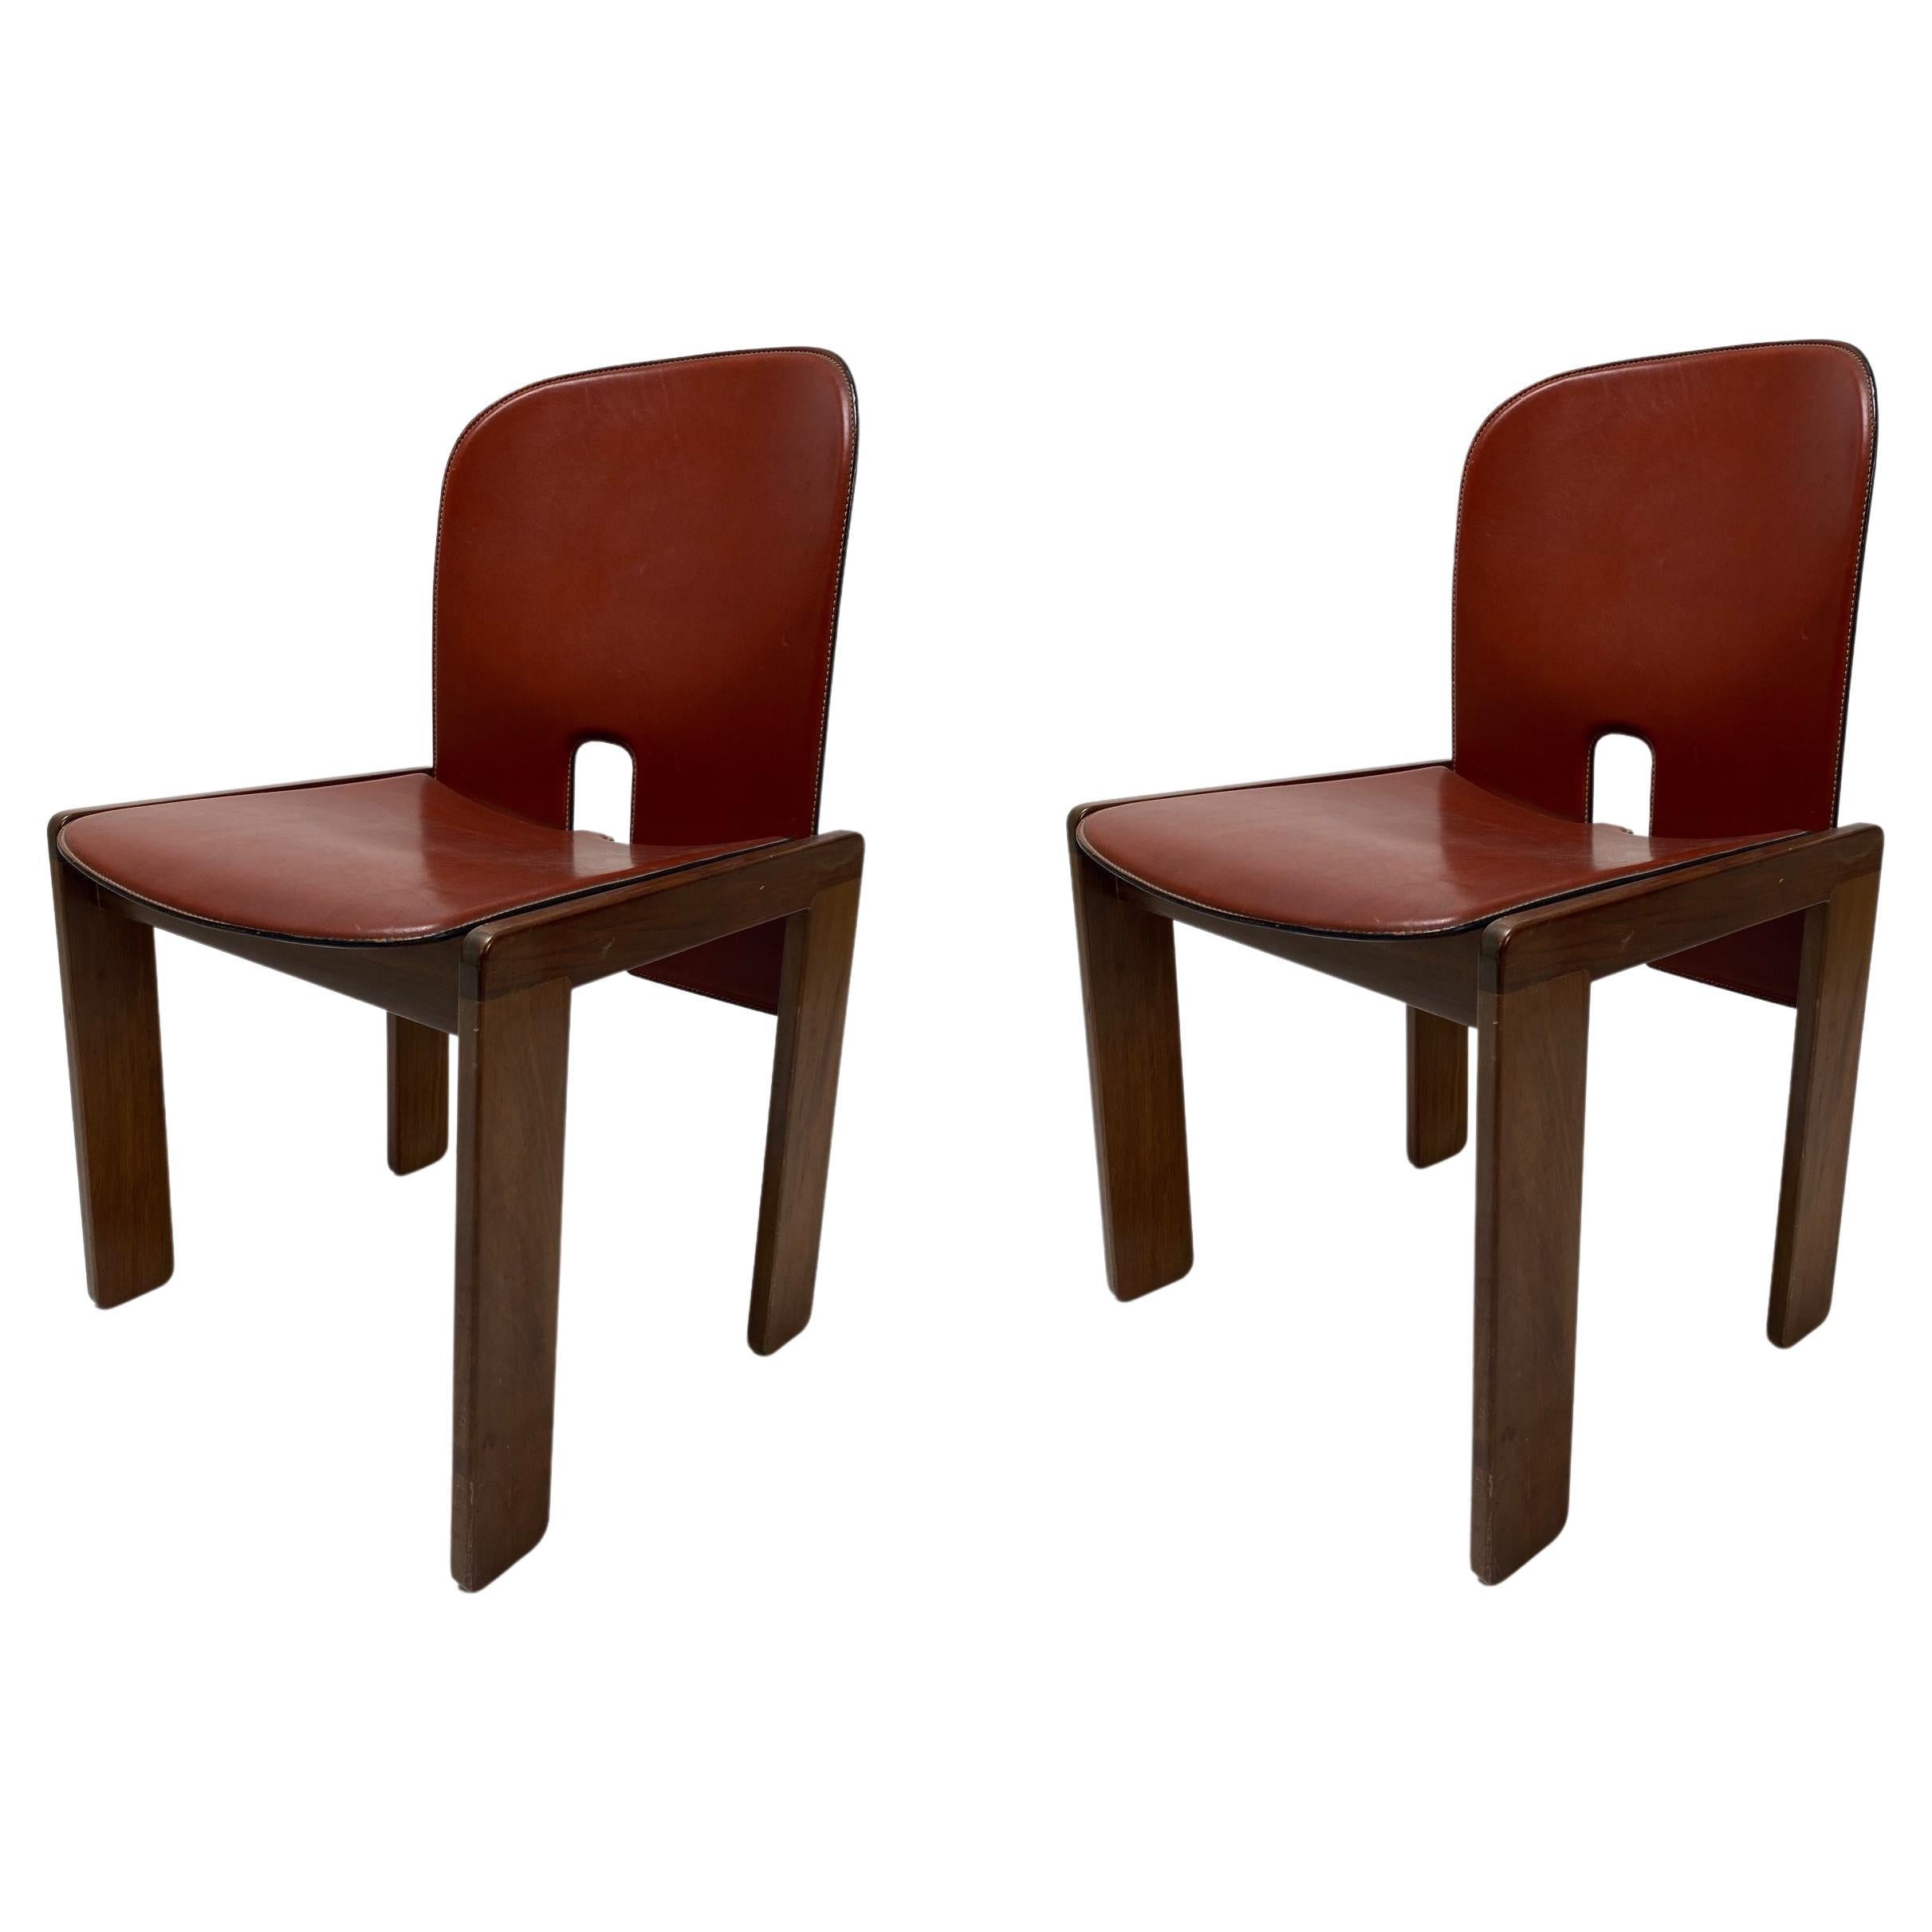 Set of 2 Lether 121 Chairs, Afra & Tobia Scarpa, Cassina, Italy, 1967 For Sale